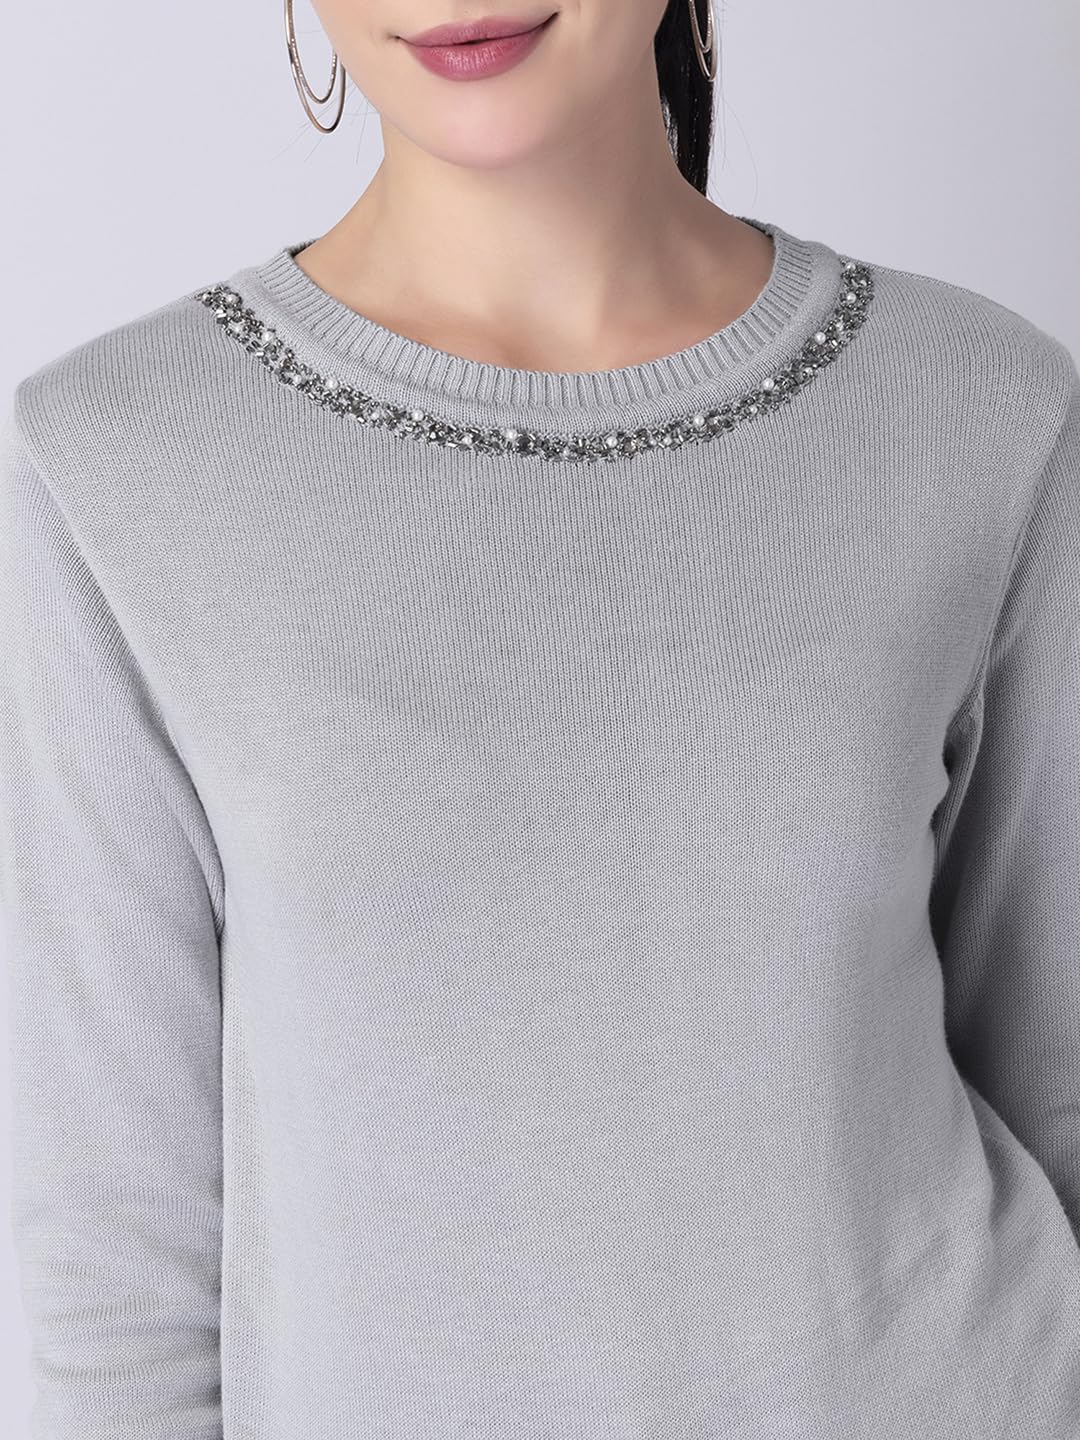 FabAlley Women's Viscose Rayon Round Neck Sweater (SWT00403_Grey_M) 